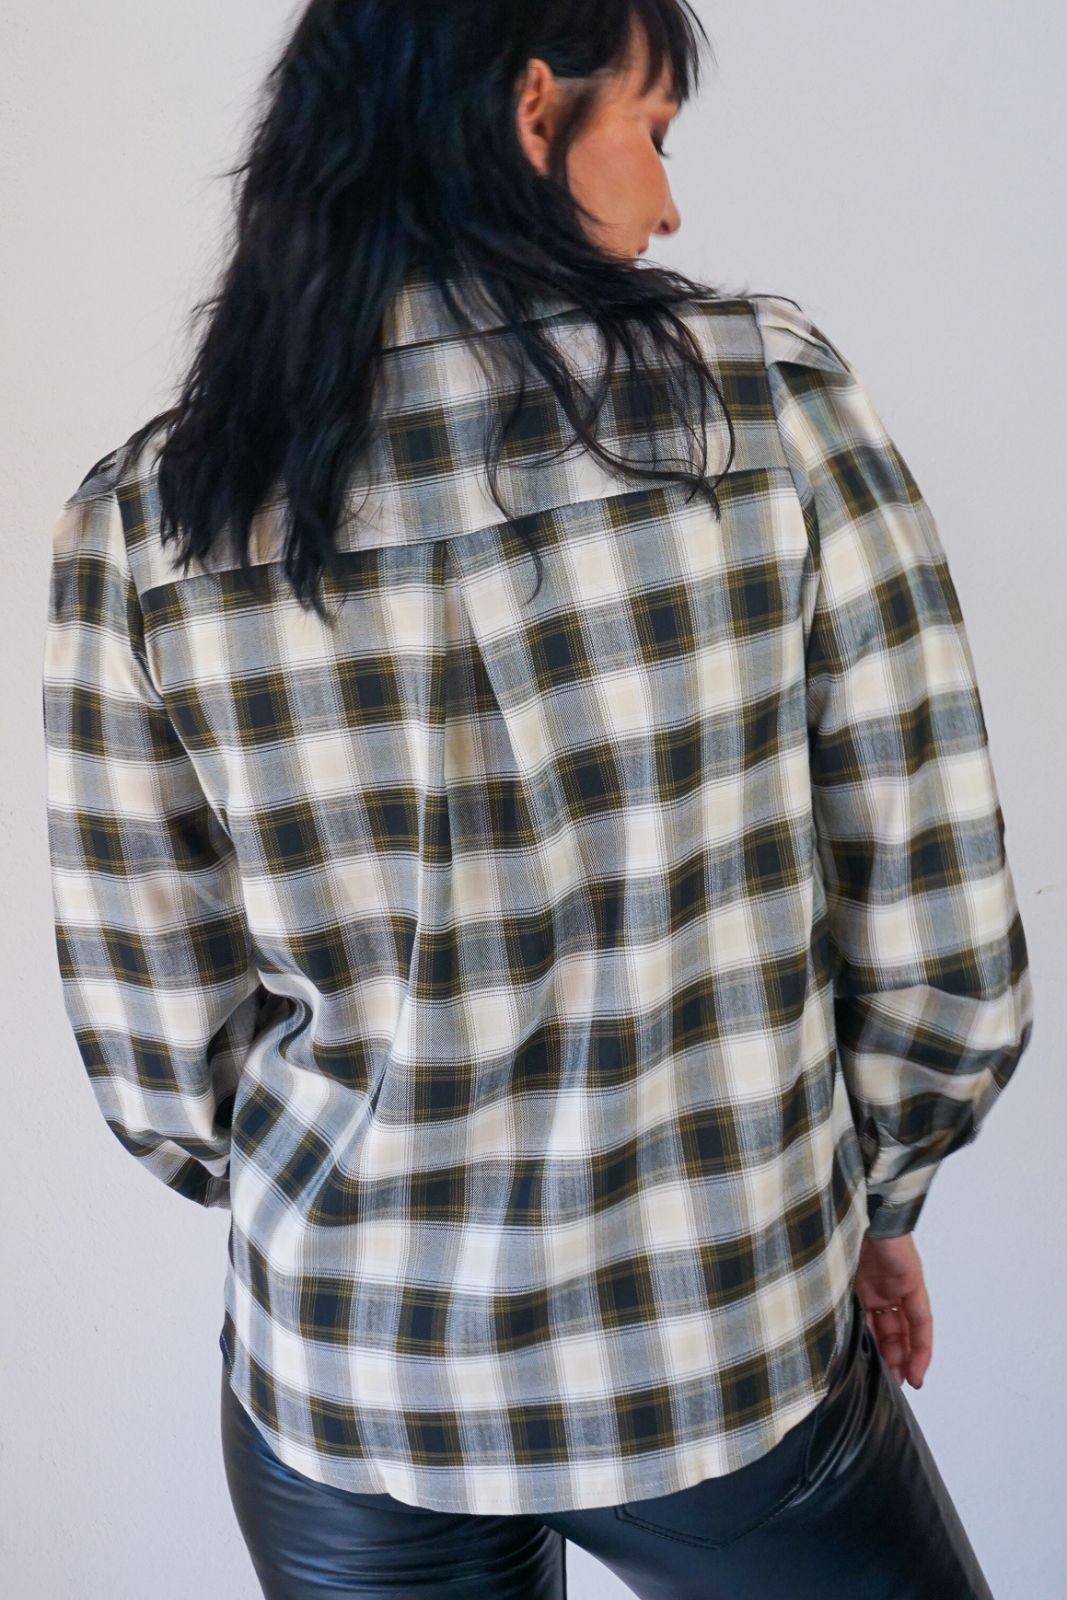 Checked shirt balloon sleeves beige brown oversized